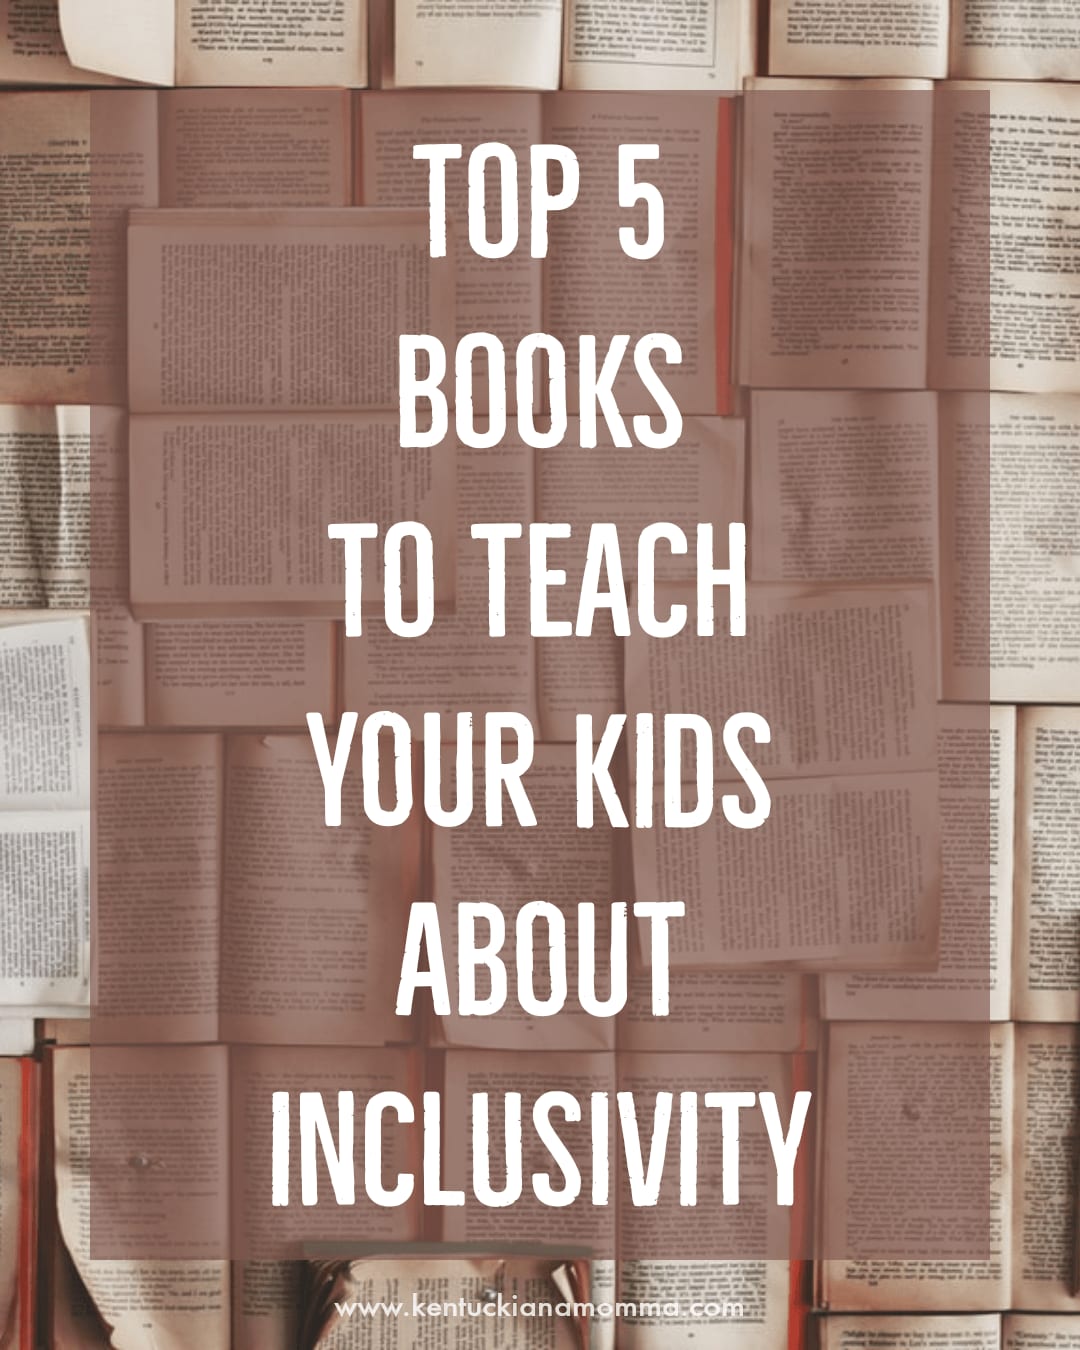 Top 5 Books to Teach Kids About Inclusivity